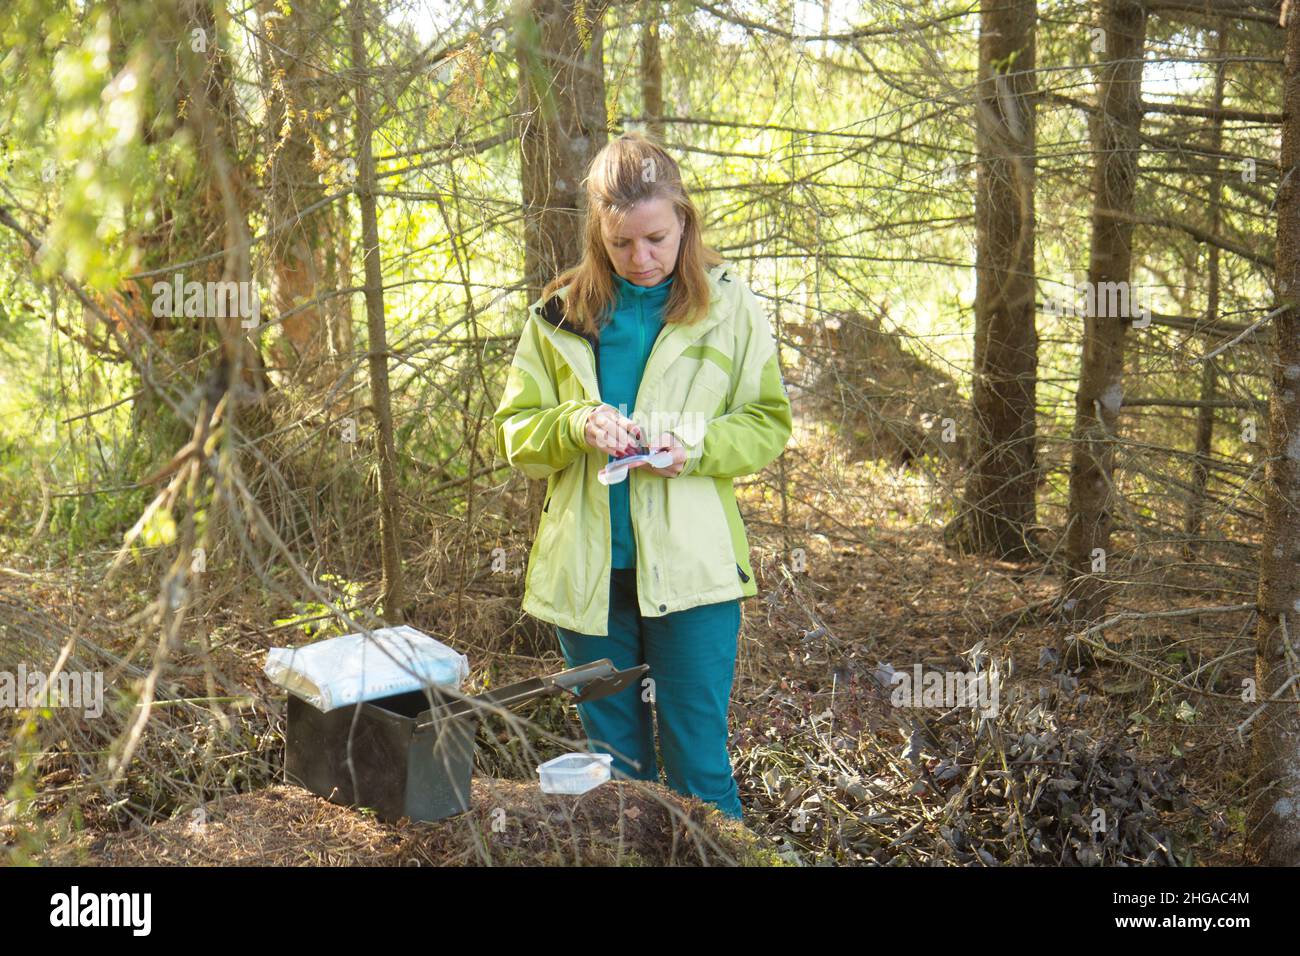 A woman geocaching. Women in woods find geocache container.  Stock Photo